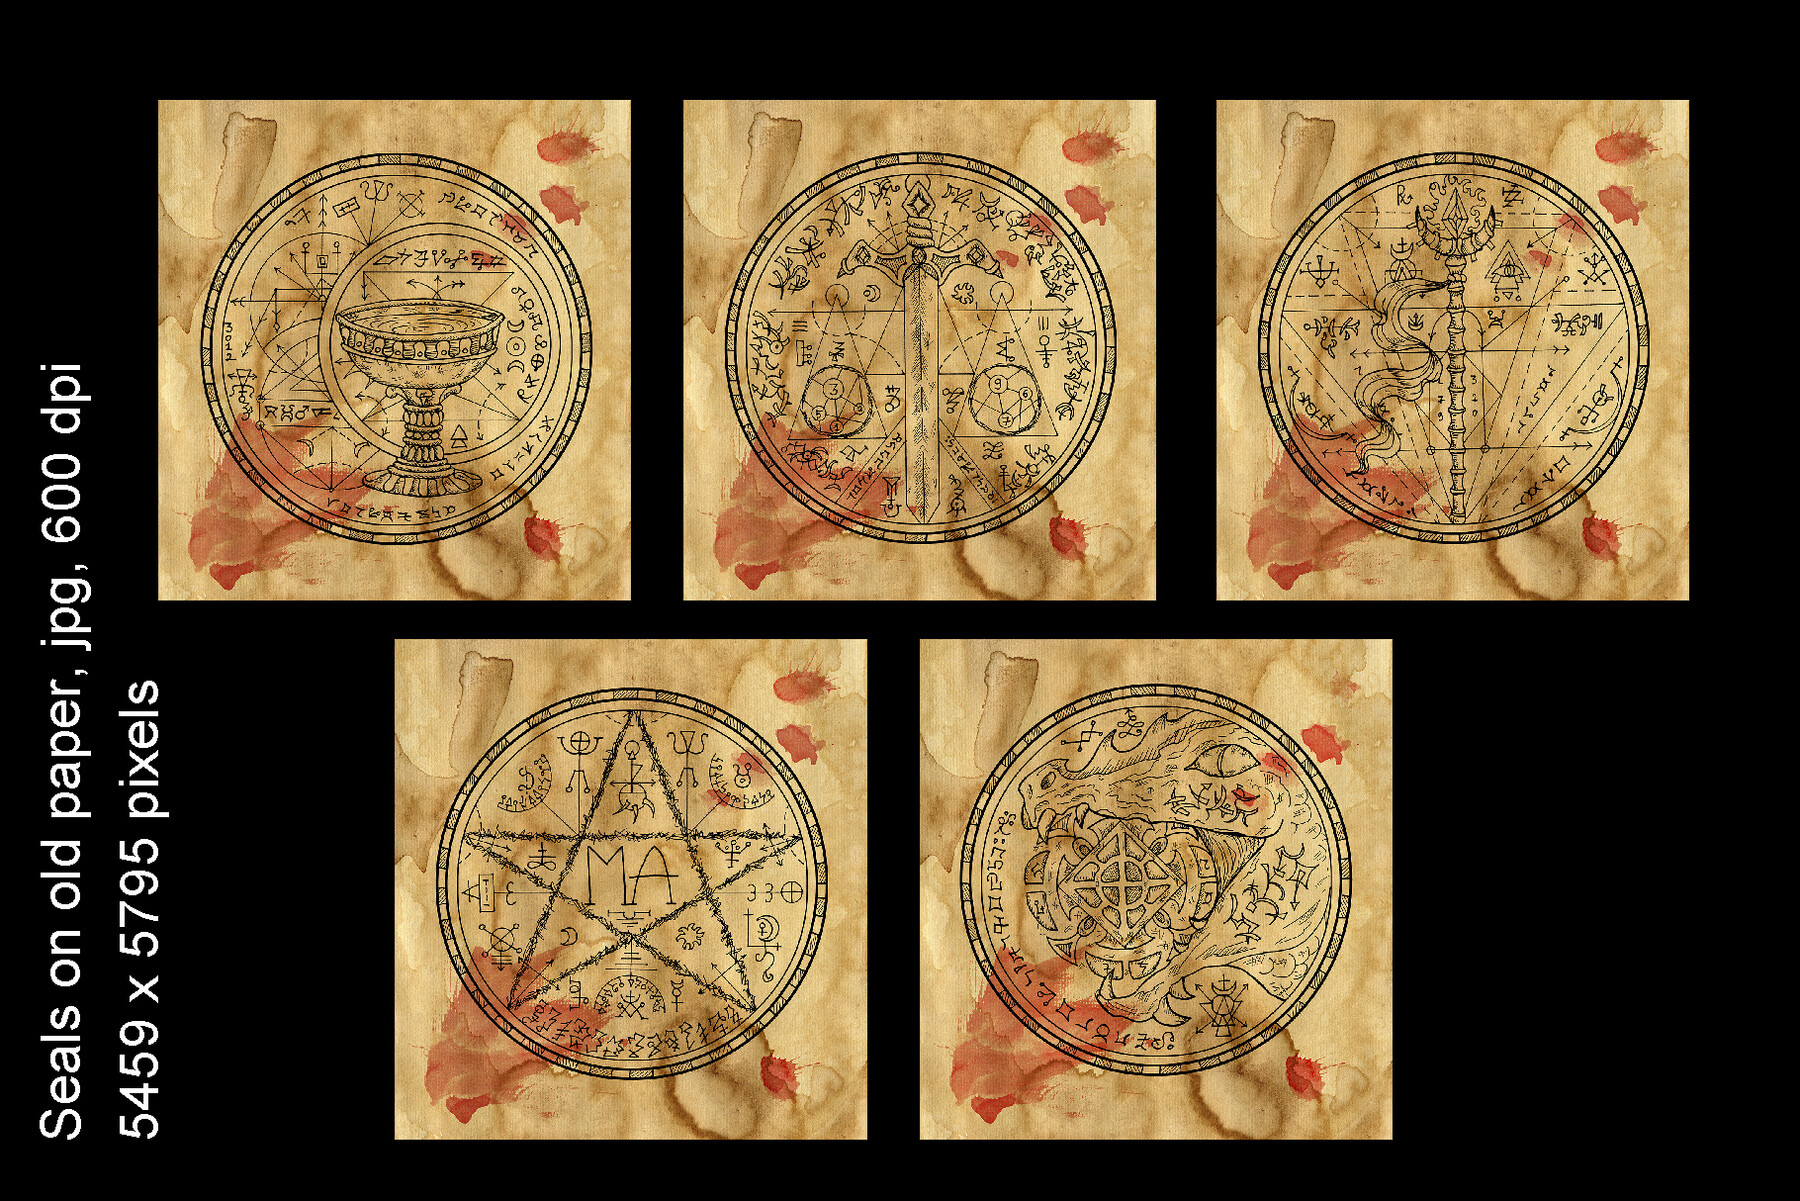 Seamless pattern with magic seal, fantasy symbols and pentagram on